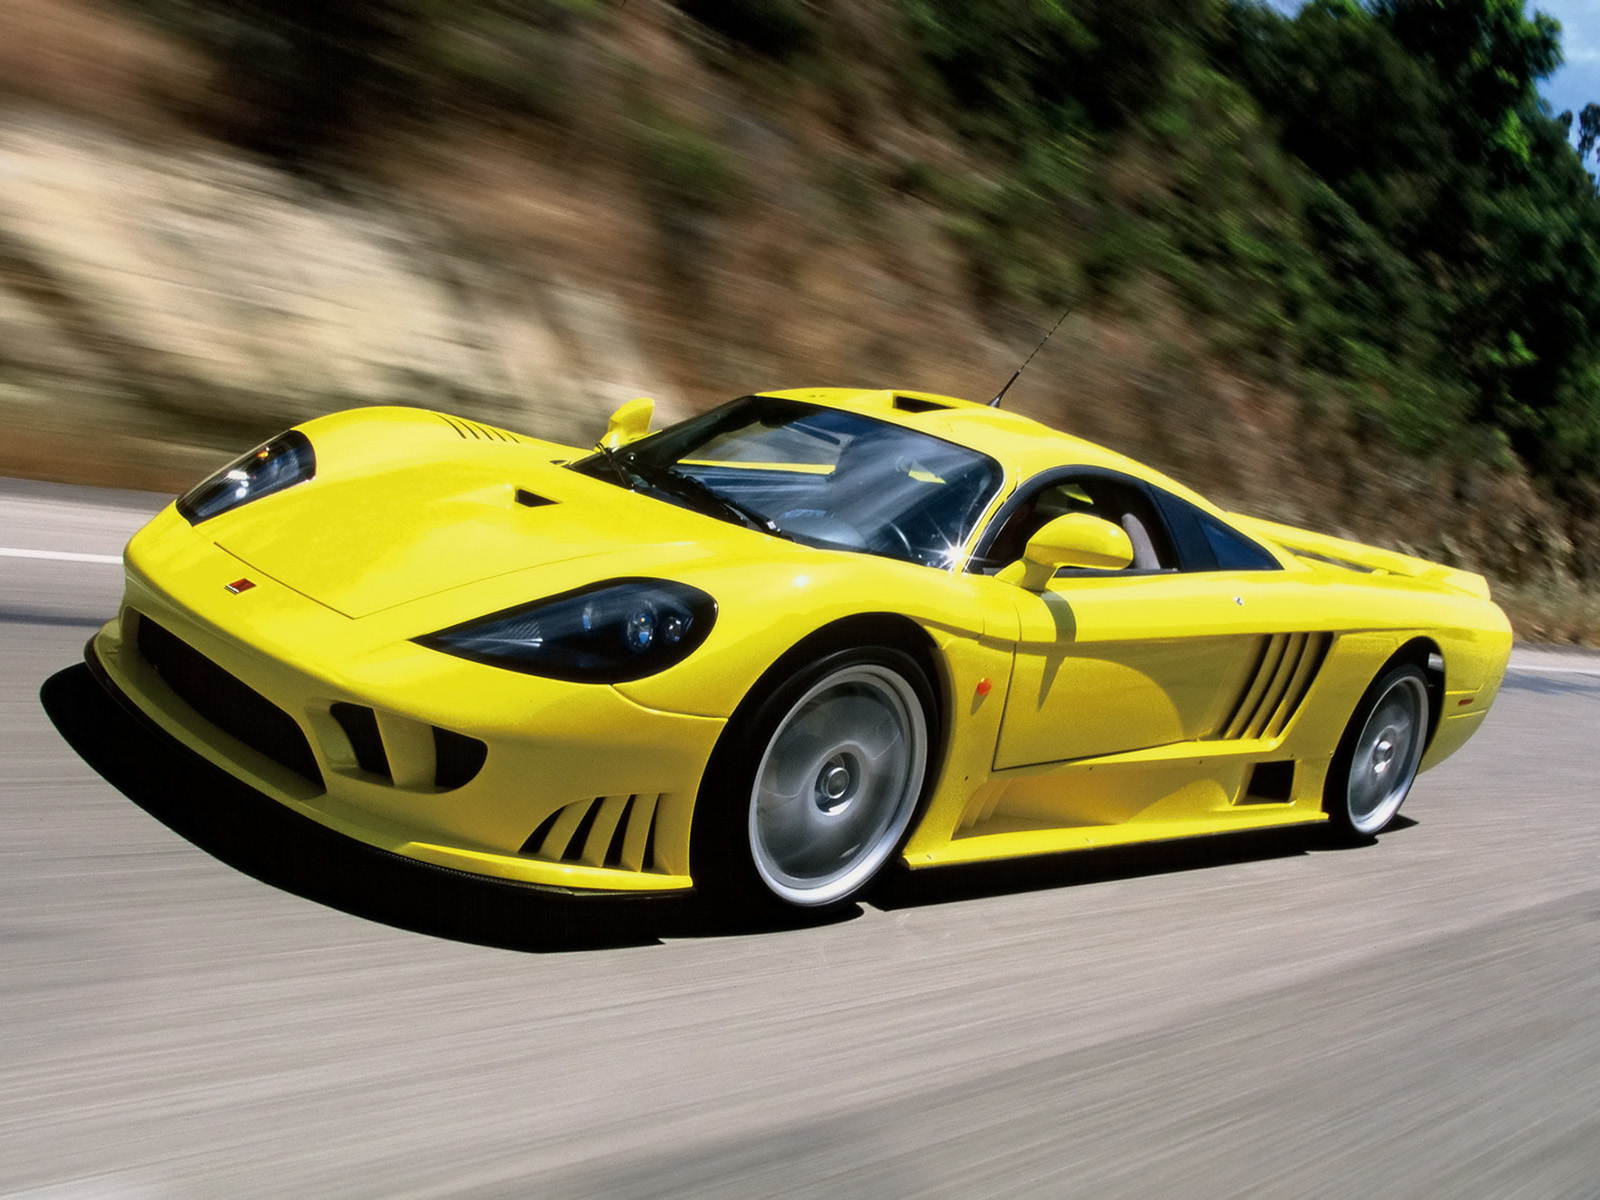 Saleen S7 Twin Turbo - The World's Top 4 Fastest Car